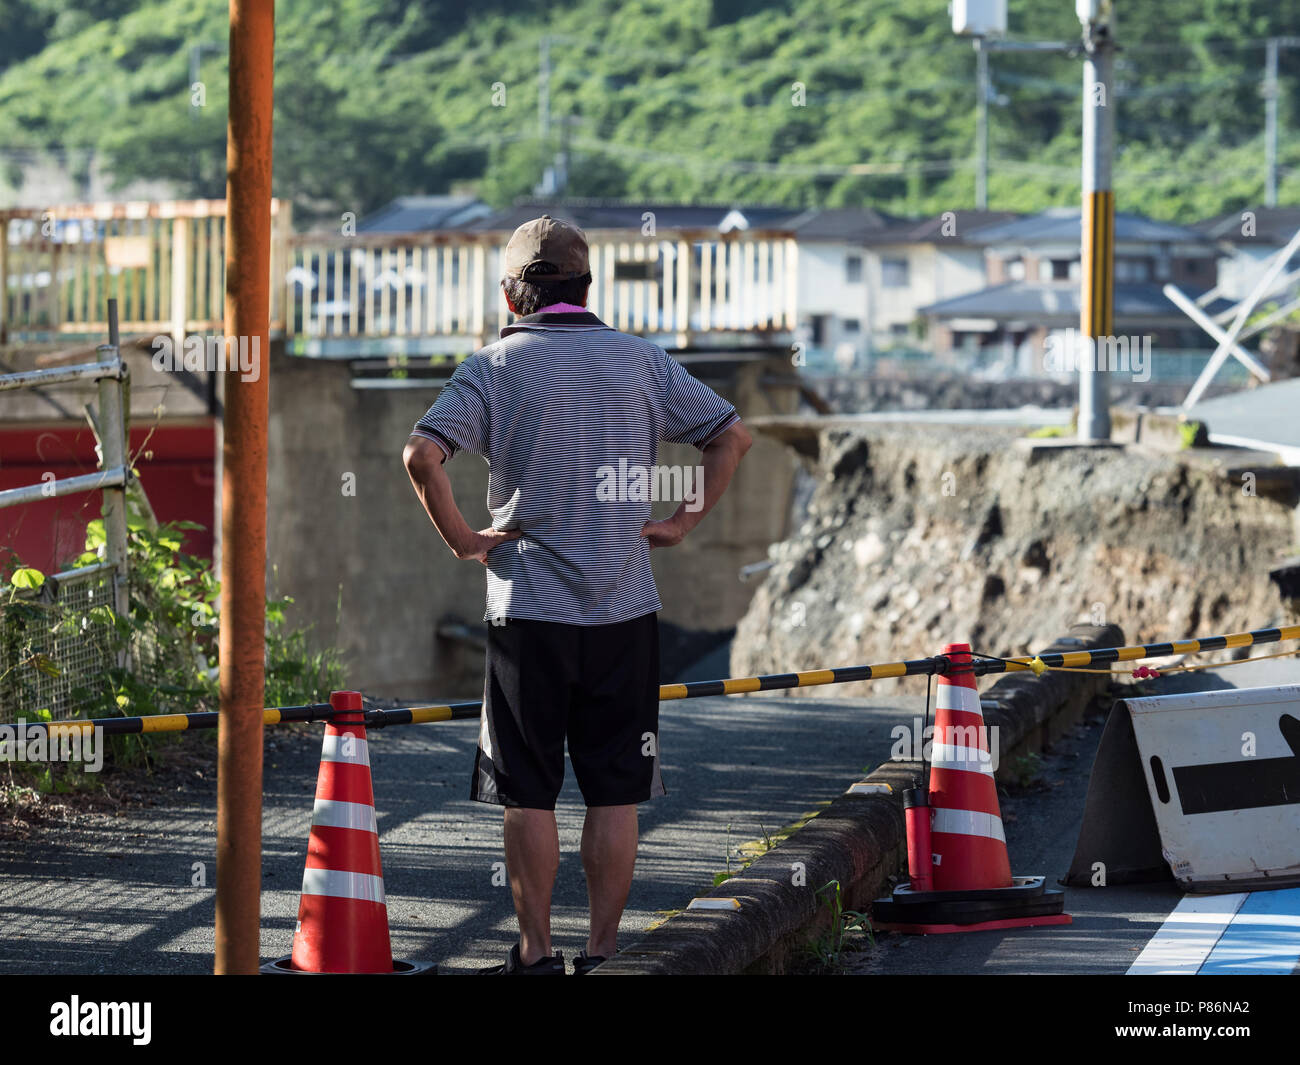 July 9, 2018, Nomura, Ehime Prefecture: The aftermath of the flood from Hijikawa river. In Seiyo City, Ehime Prefecture, the Hijikawa River flooded, leaving three men and two women dead. Local residents survey the damage and work out what to do next. (Photo by Tomohiro Takahashi/AFLO) Stock Photo